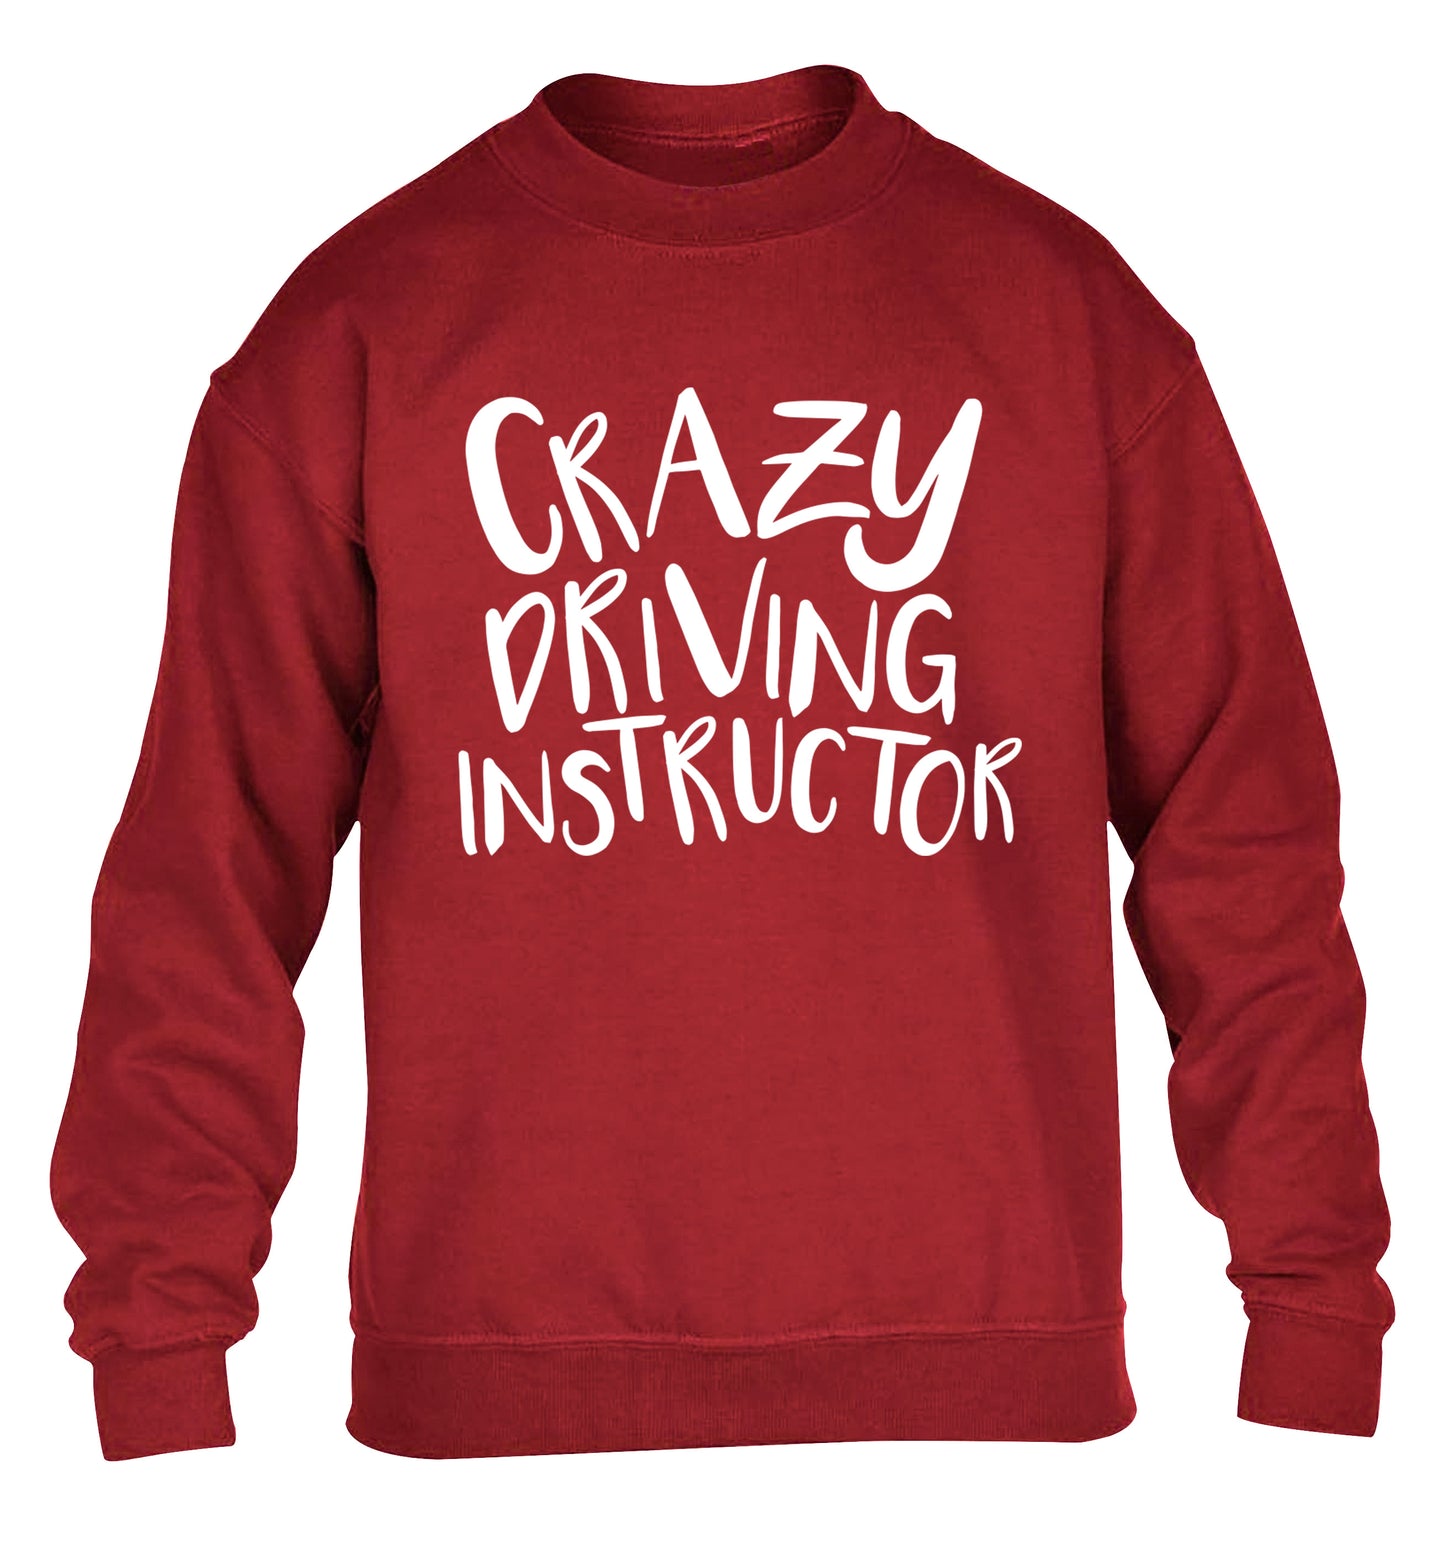 Crazy driving instructor children's grey sweater 12-13 Years